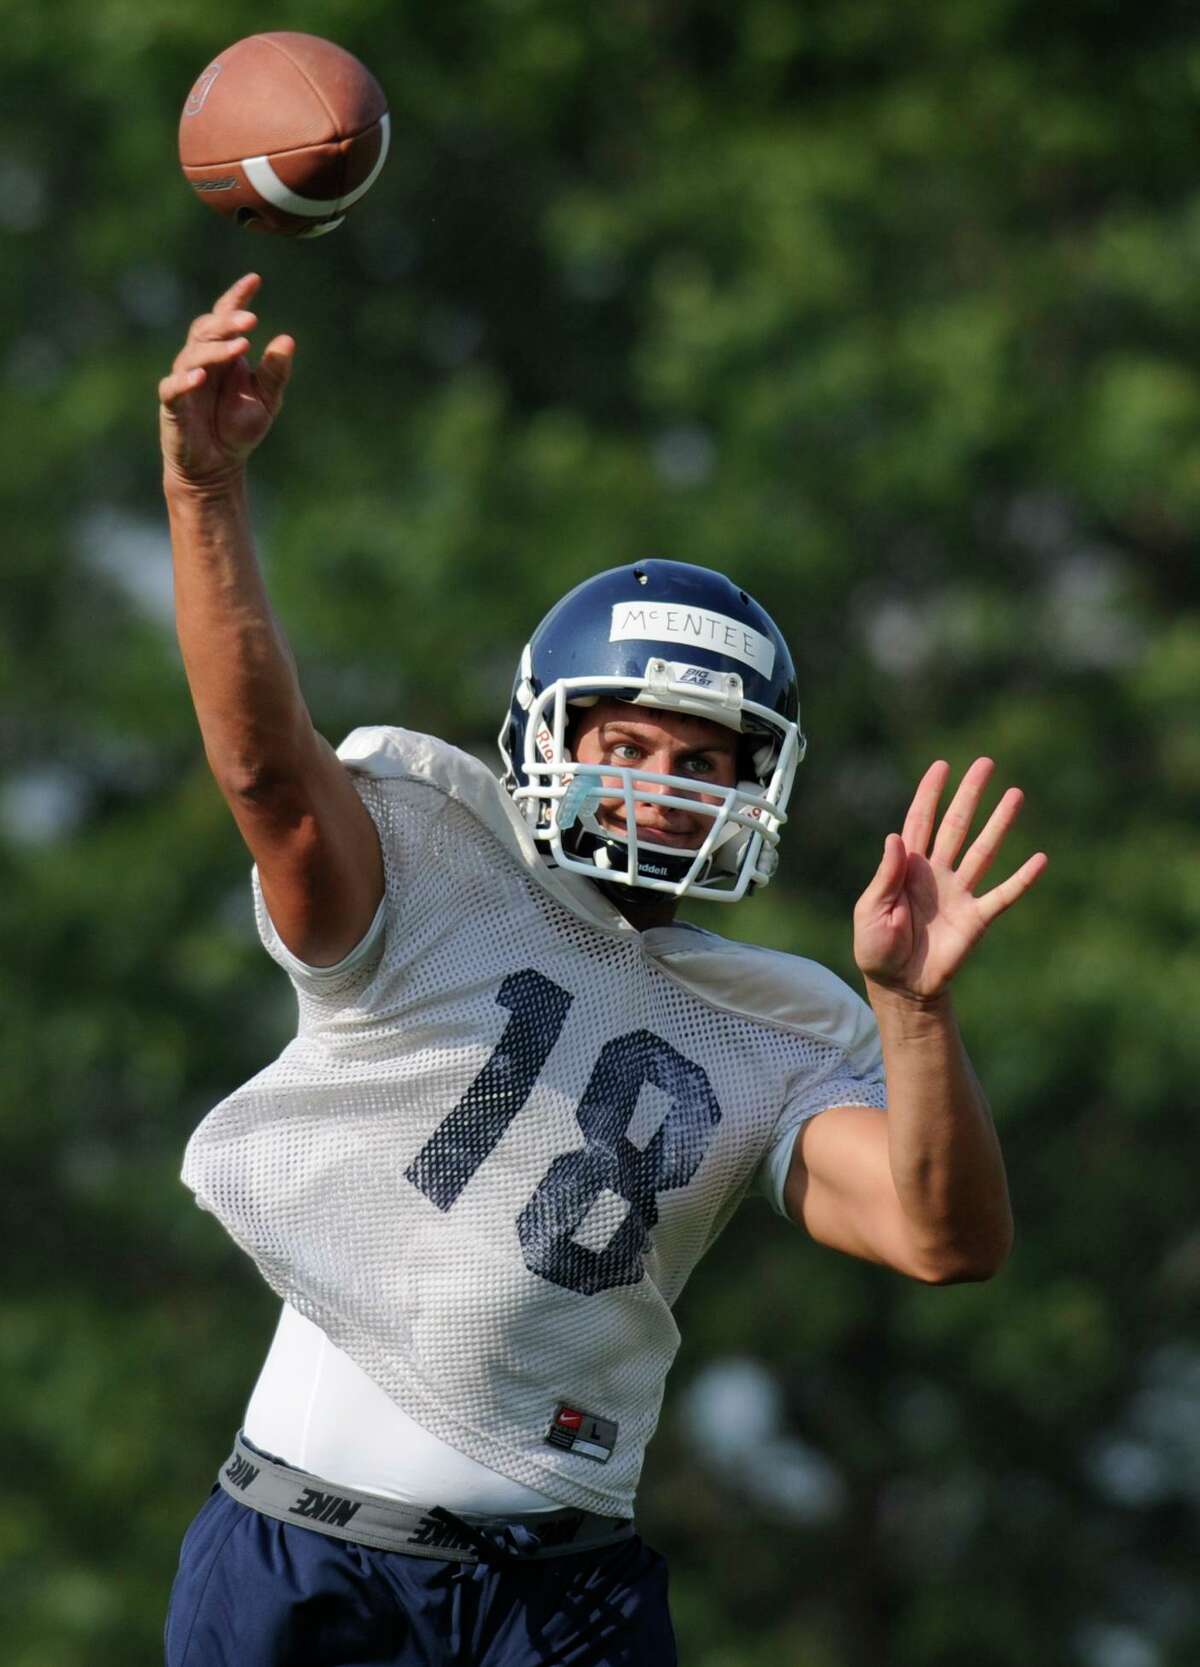 Connecticut quarterback Johnny McEntee throws during the first NCAA college football practice of the season at the University of Connecticut in Storrs, Conn., Friday, Aug. 5, 2011. McEntee, a former White house official, was seen briefly in the House Jan. 6 committee hearing Thursday.